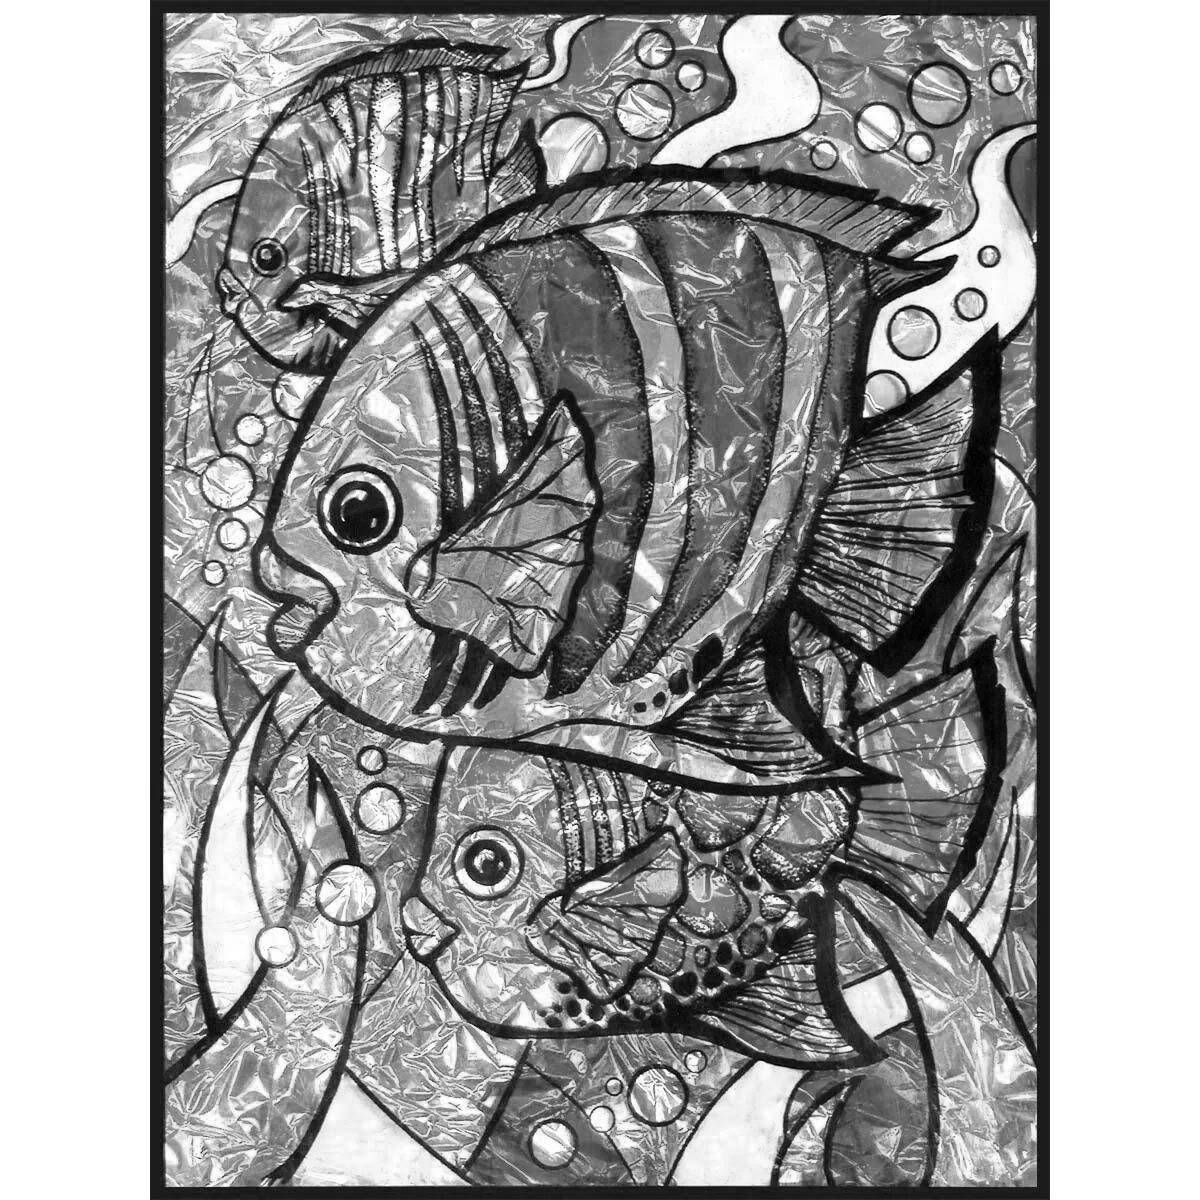 Adorable fish by numbers coloring book